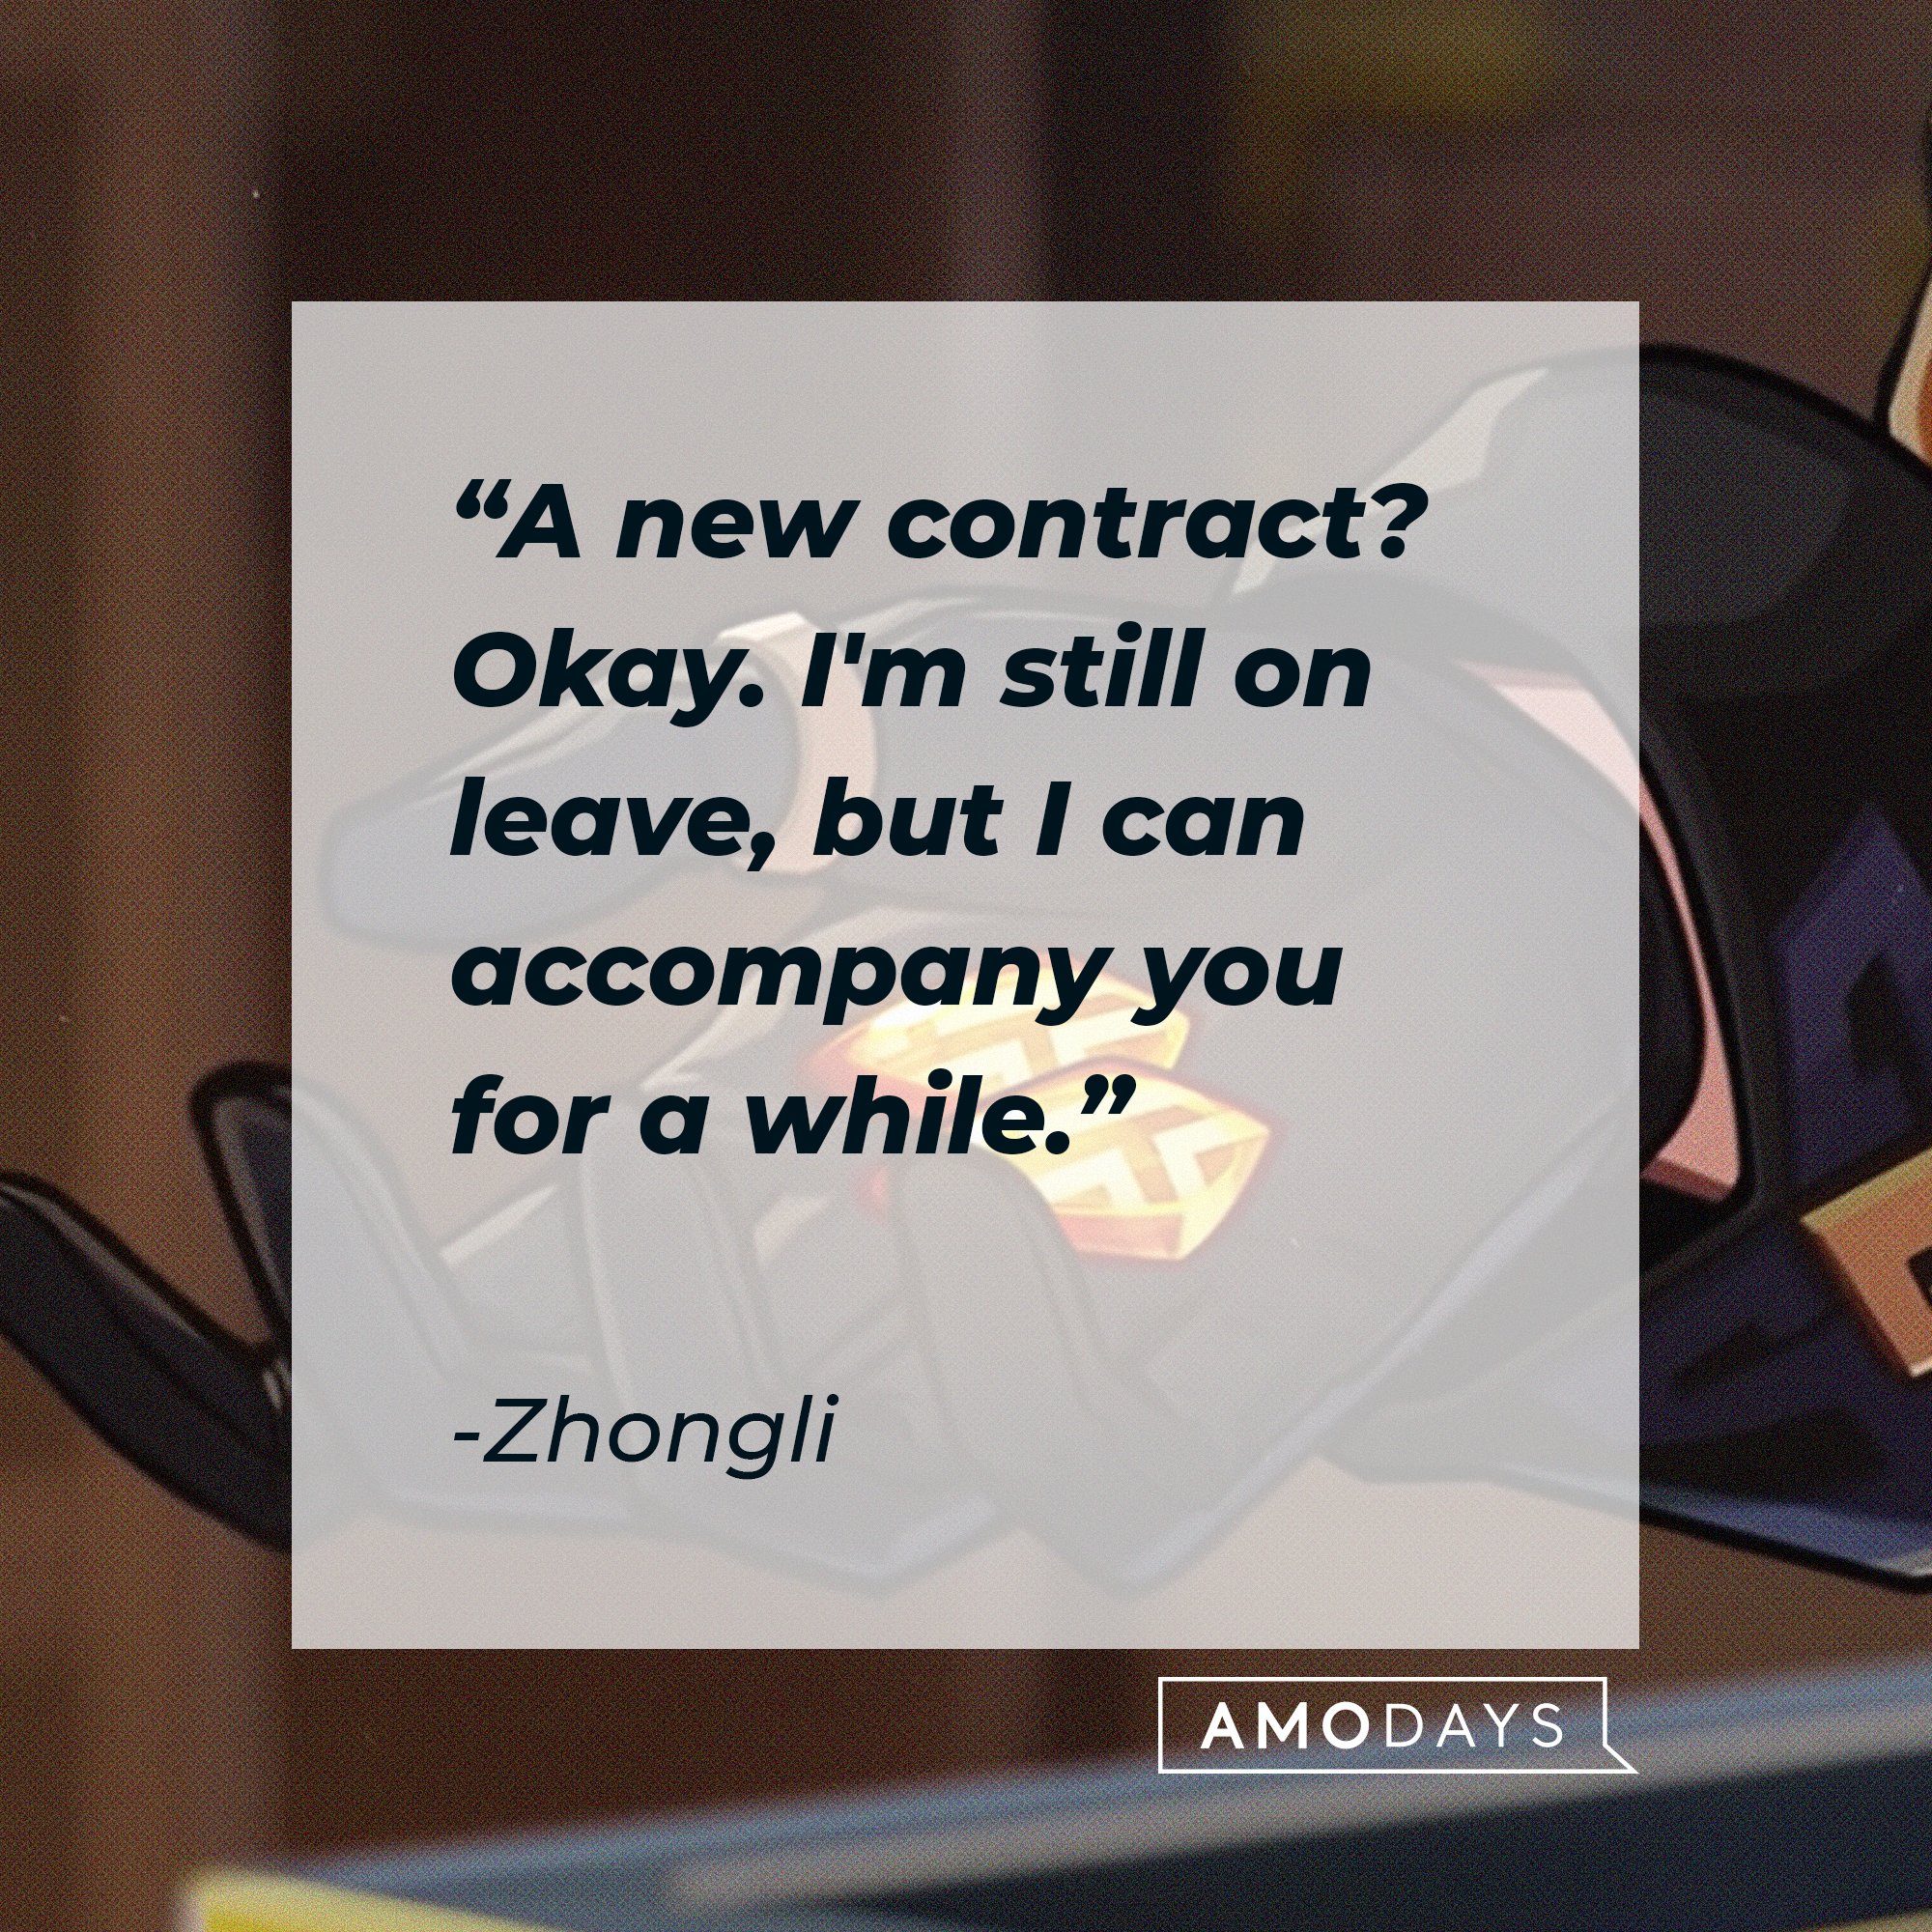 Zhongli’s quote: "A new contract? Okay. I'm still on leave, but I can accompany you for a while."  | Image: AmoDays